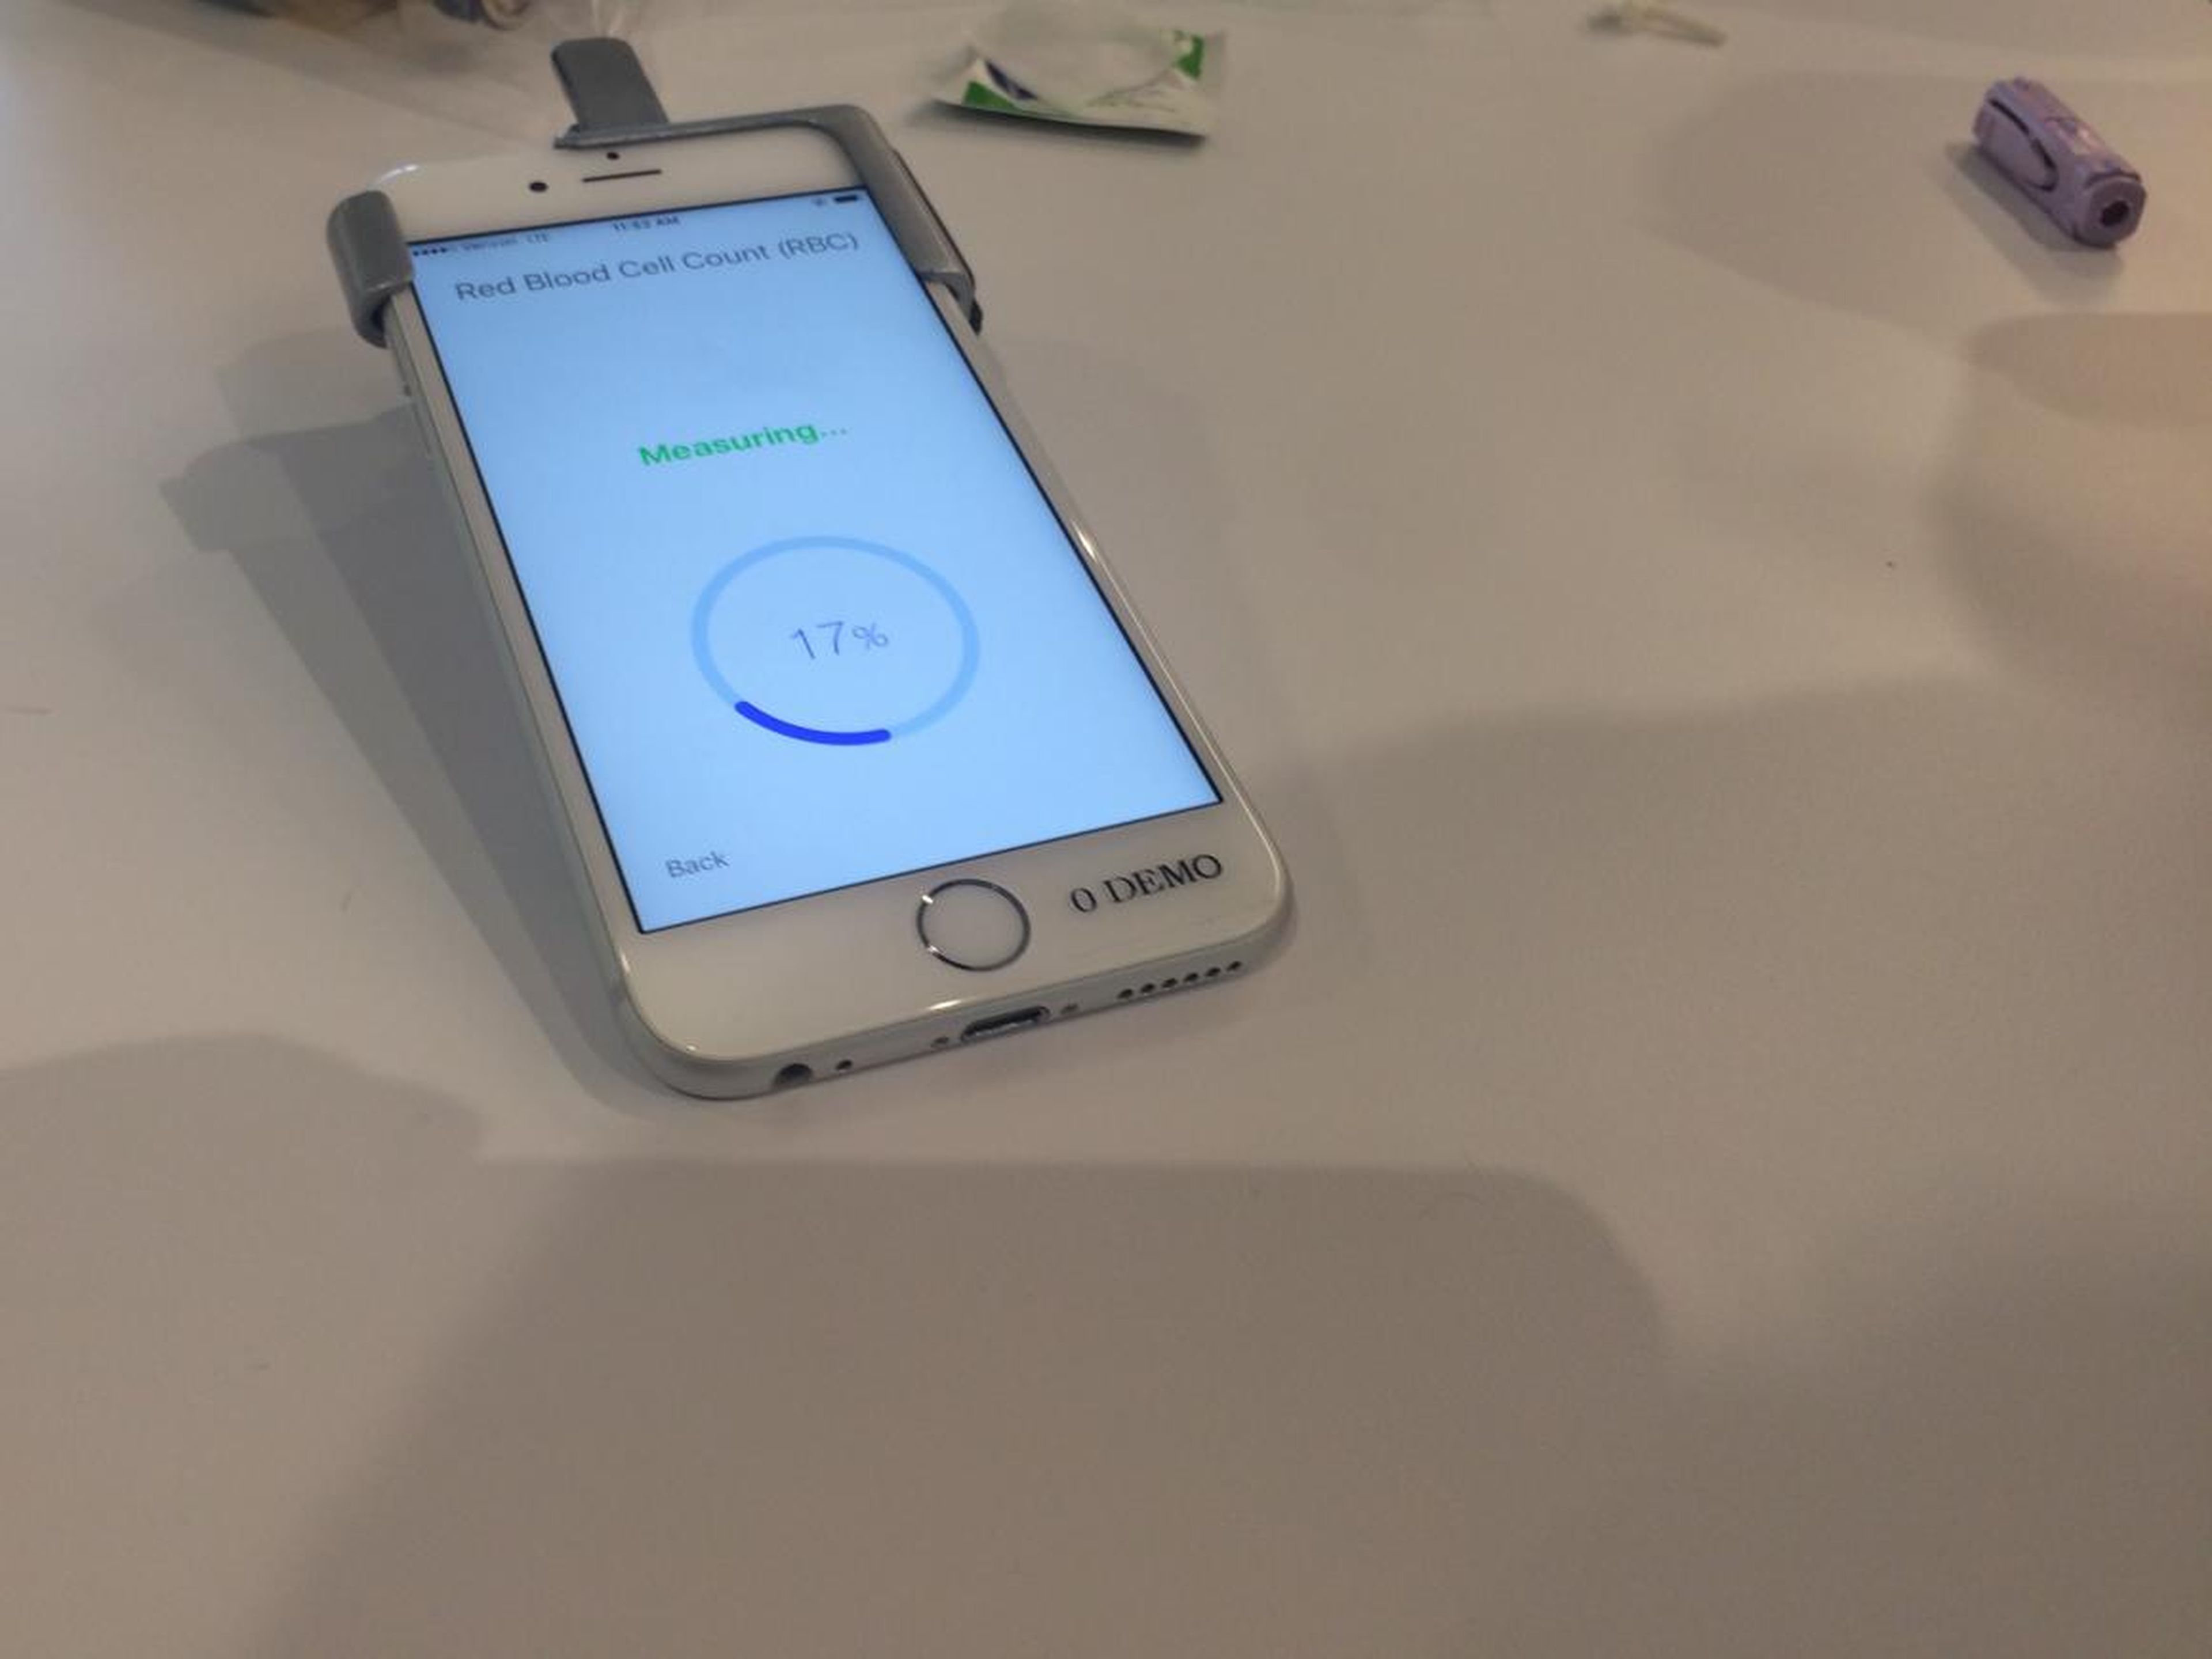 This startup wants to make blood testing as easy as snapping a photo with an iPhone